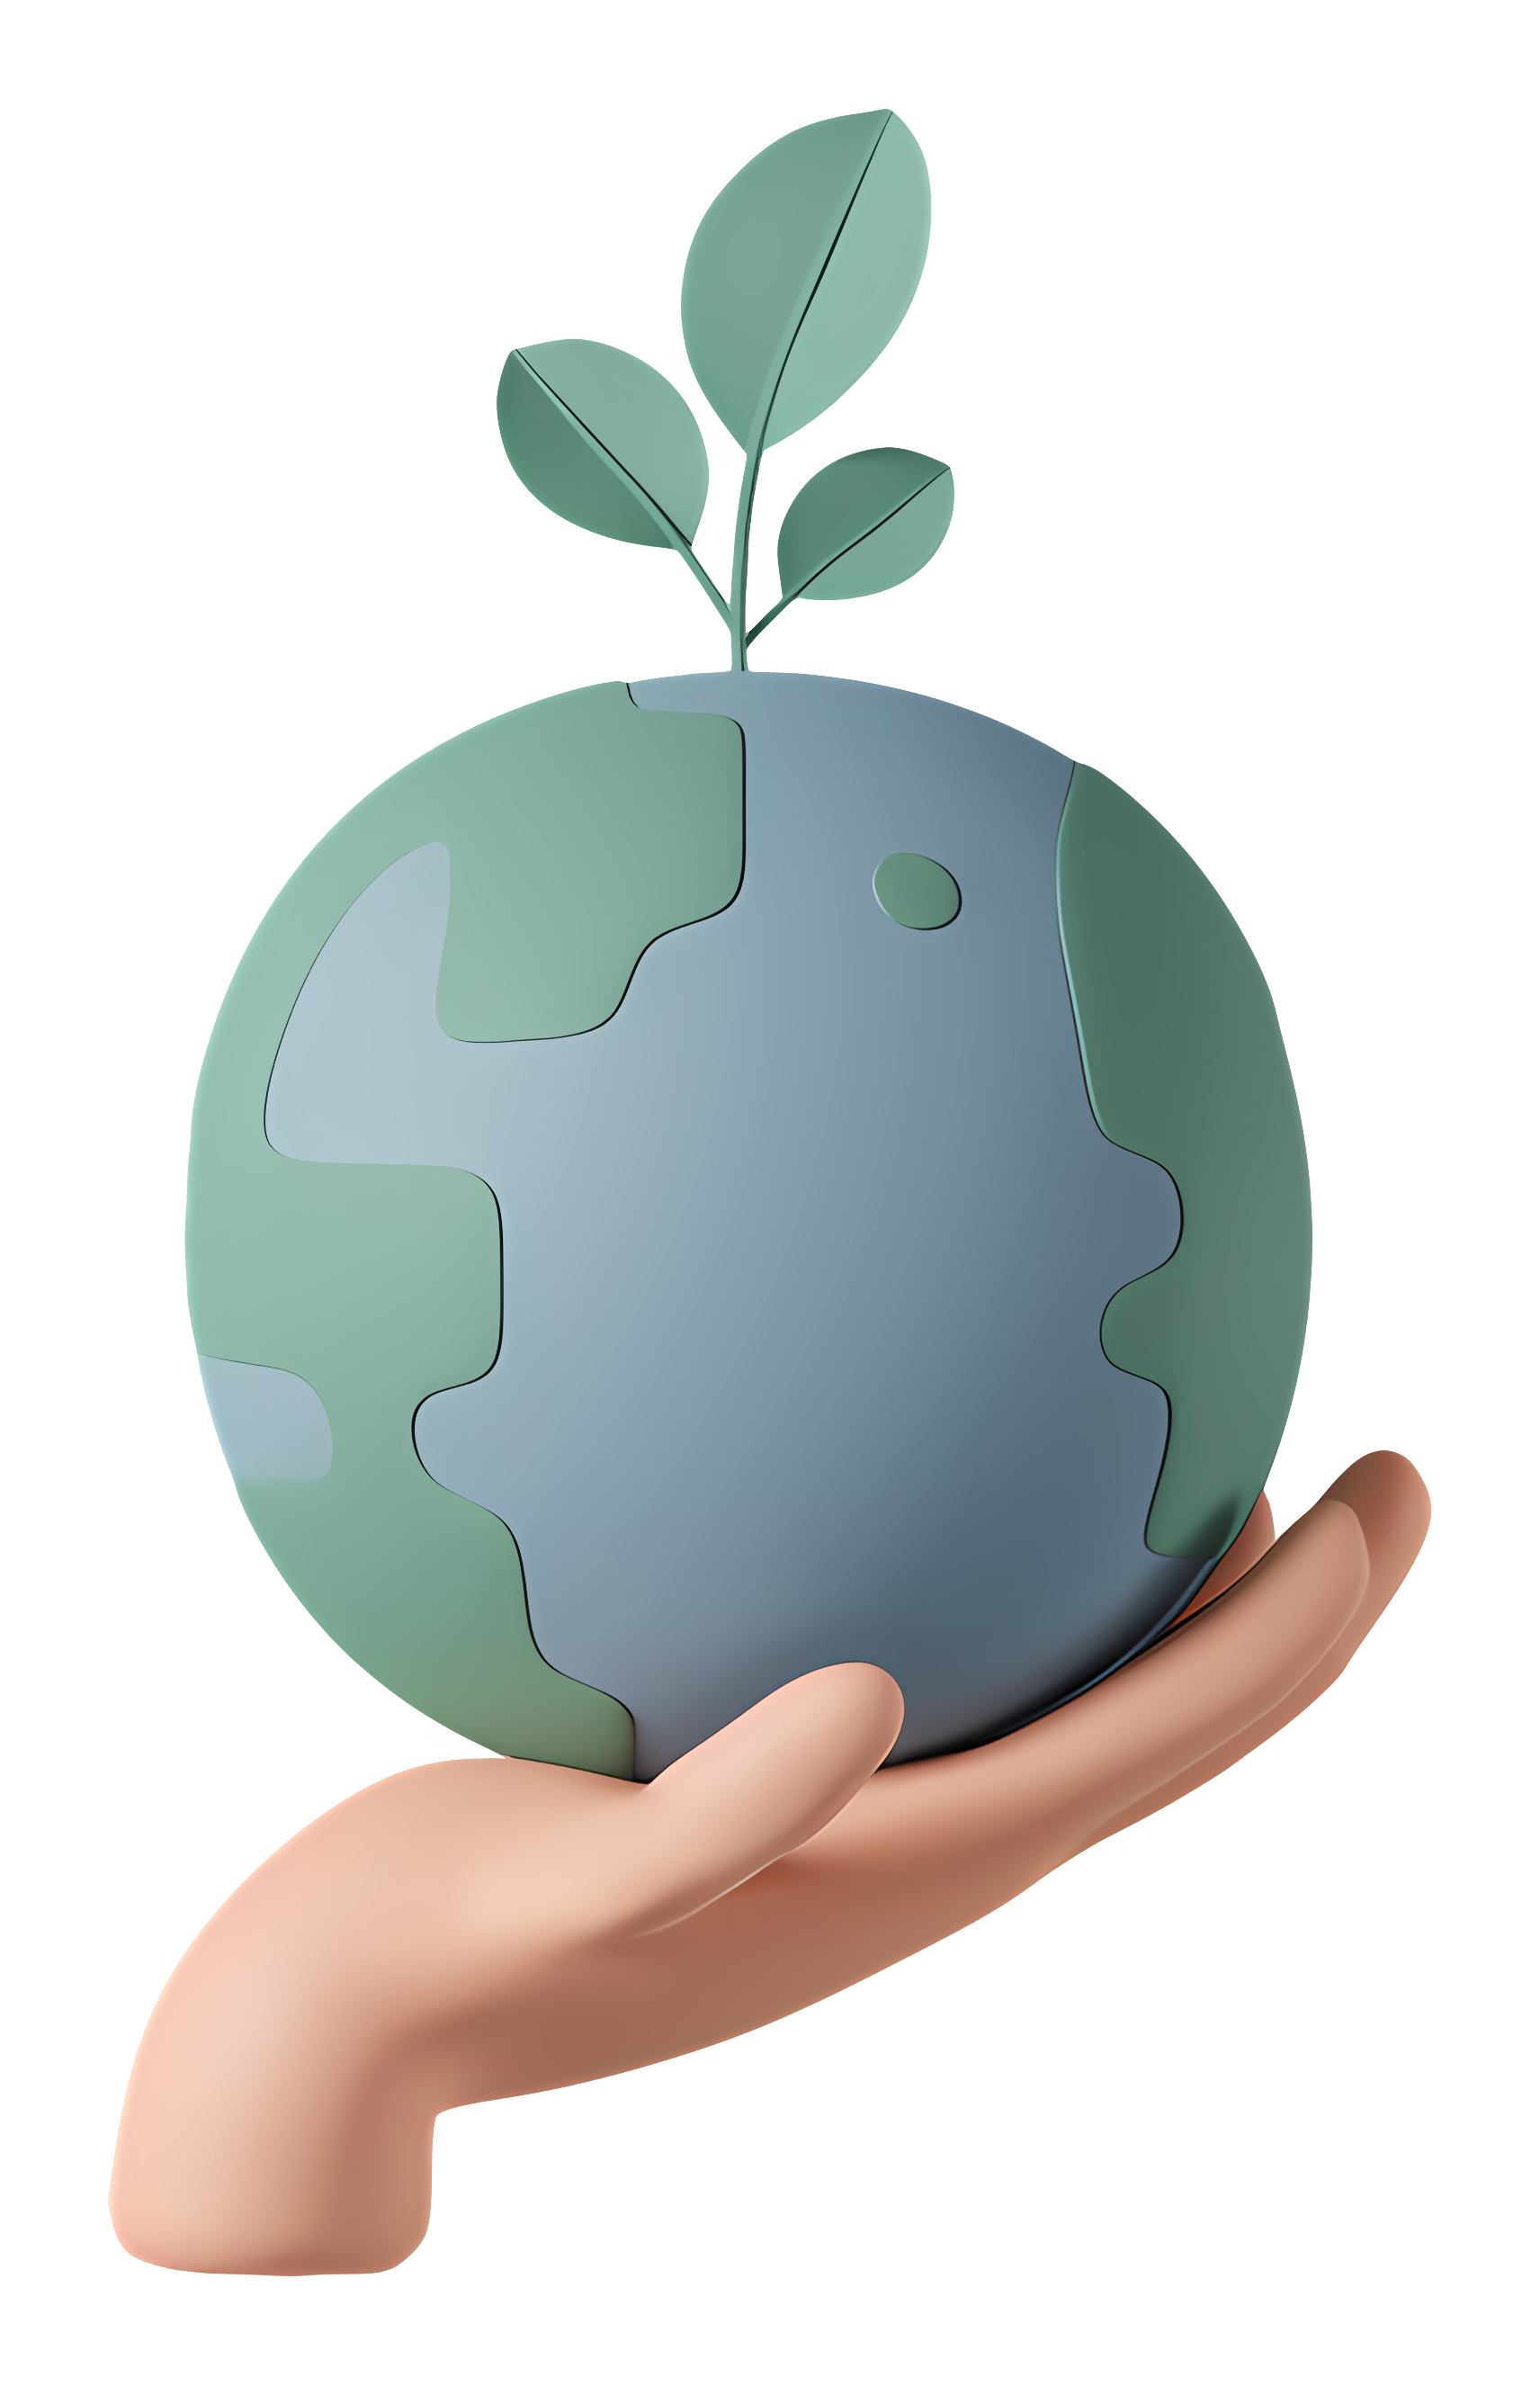 transparent-hand-holding-globe-plant-growing-from-globe-blue-t-hand-holding-globe-plant-growing-from-top65537722c6d1c7.0664452016999688028144